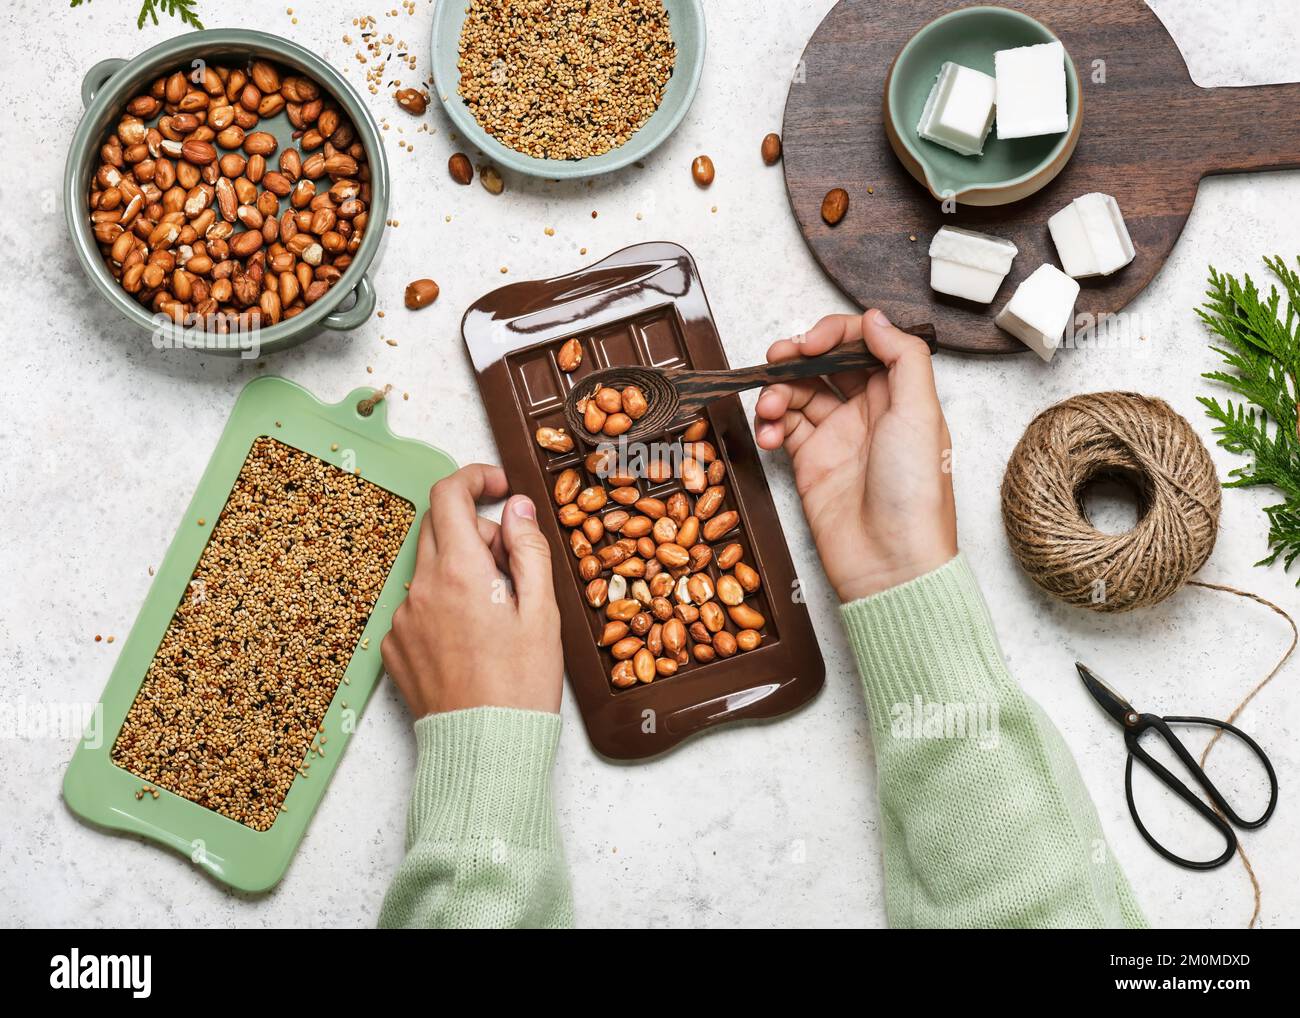 Step 1. Child filling the chocolate bar form with peanuts. Children education concept. Help people to animals. Top view. Stock Photo